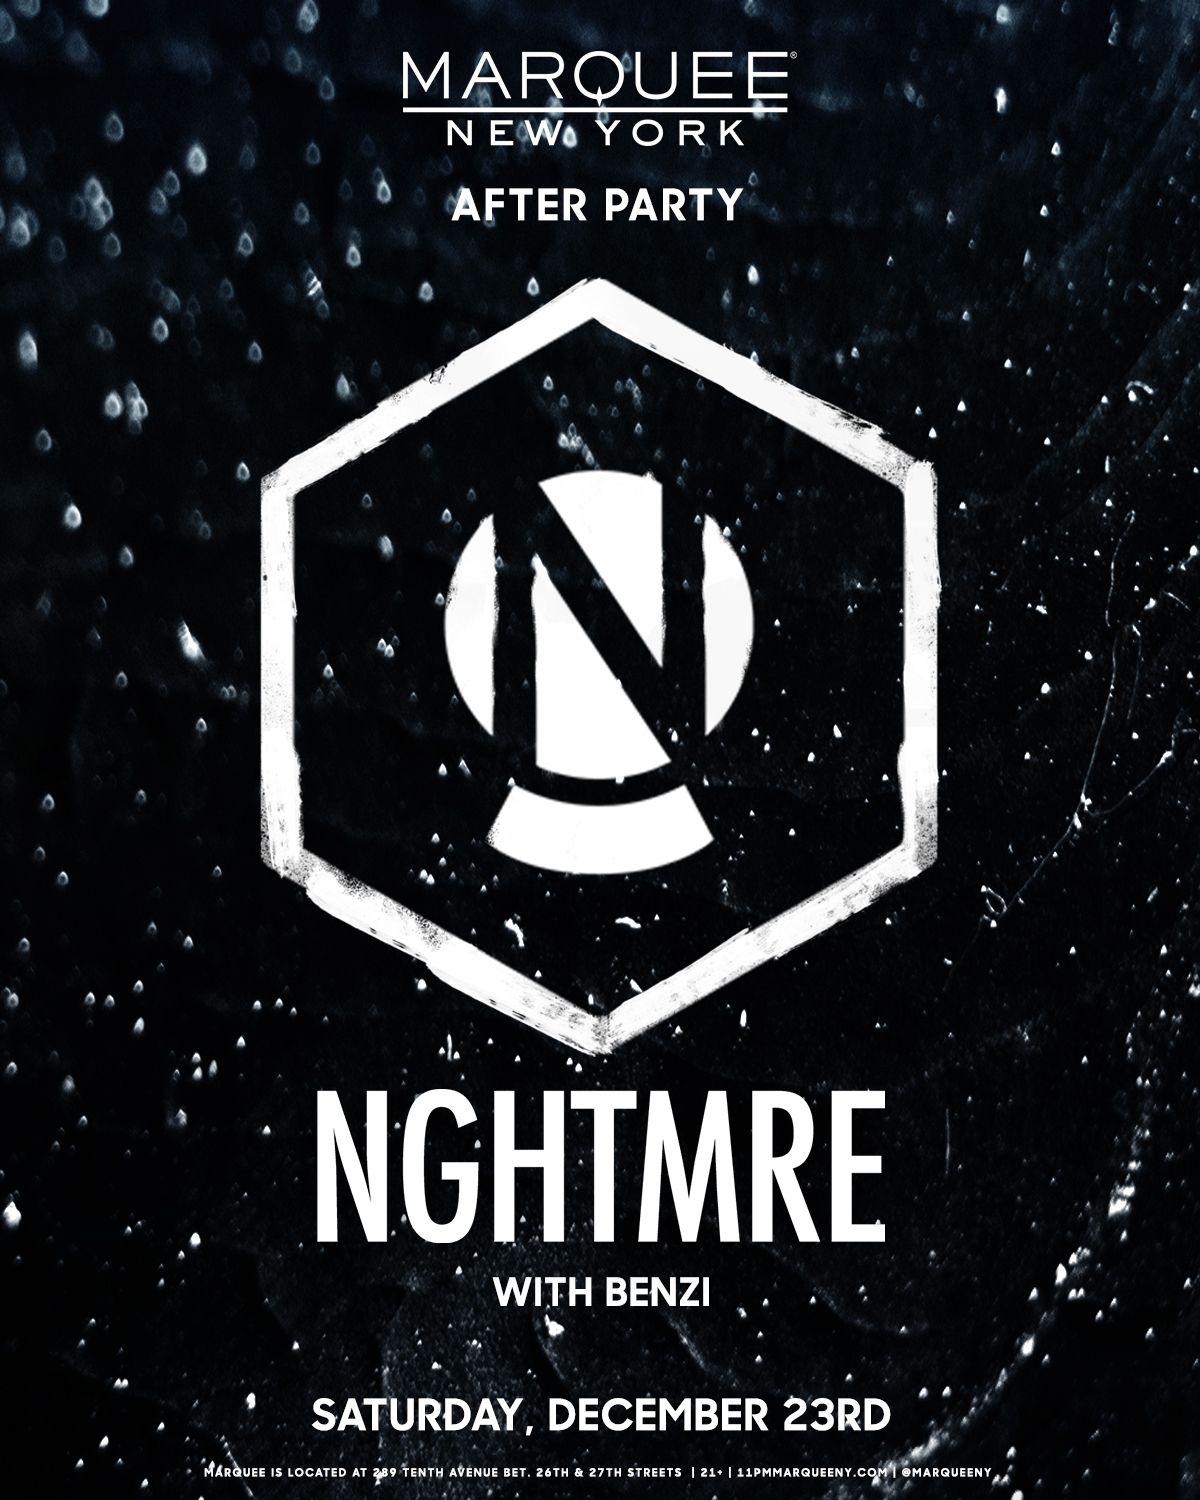 New York DJ Logo - Official Site of Marquee New York Nightclub :: NGHTMRE